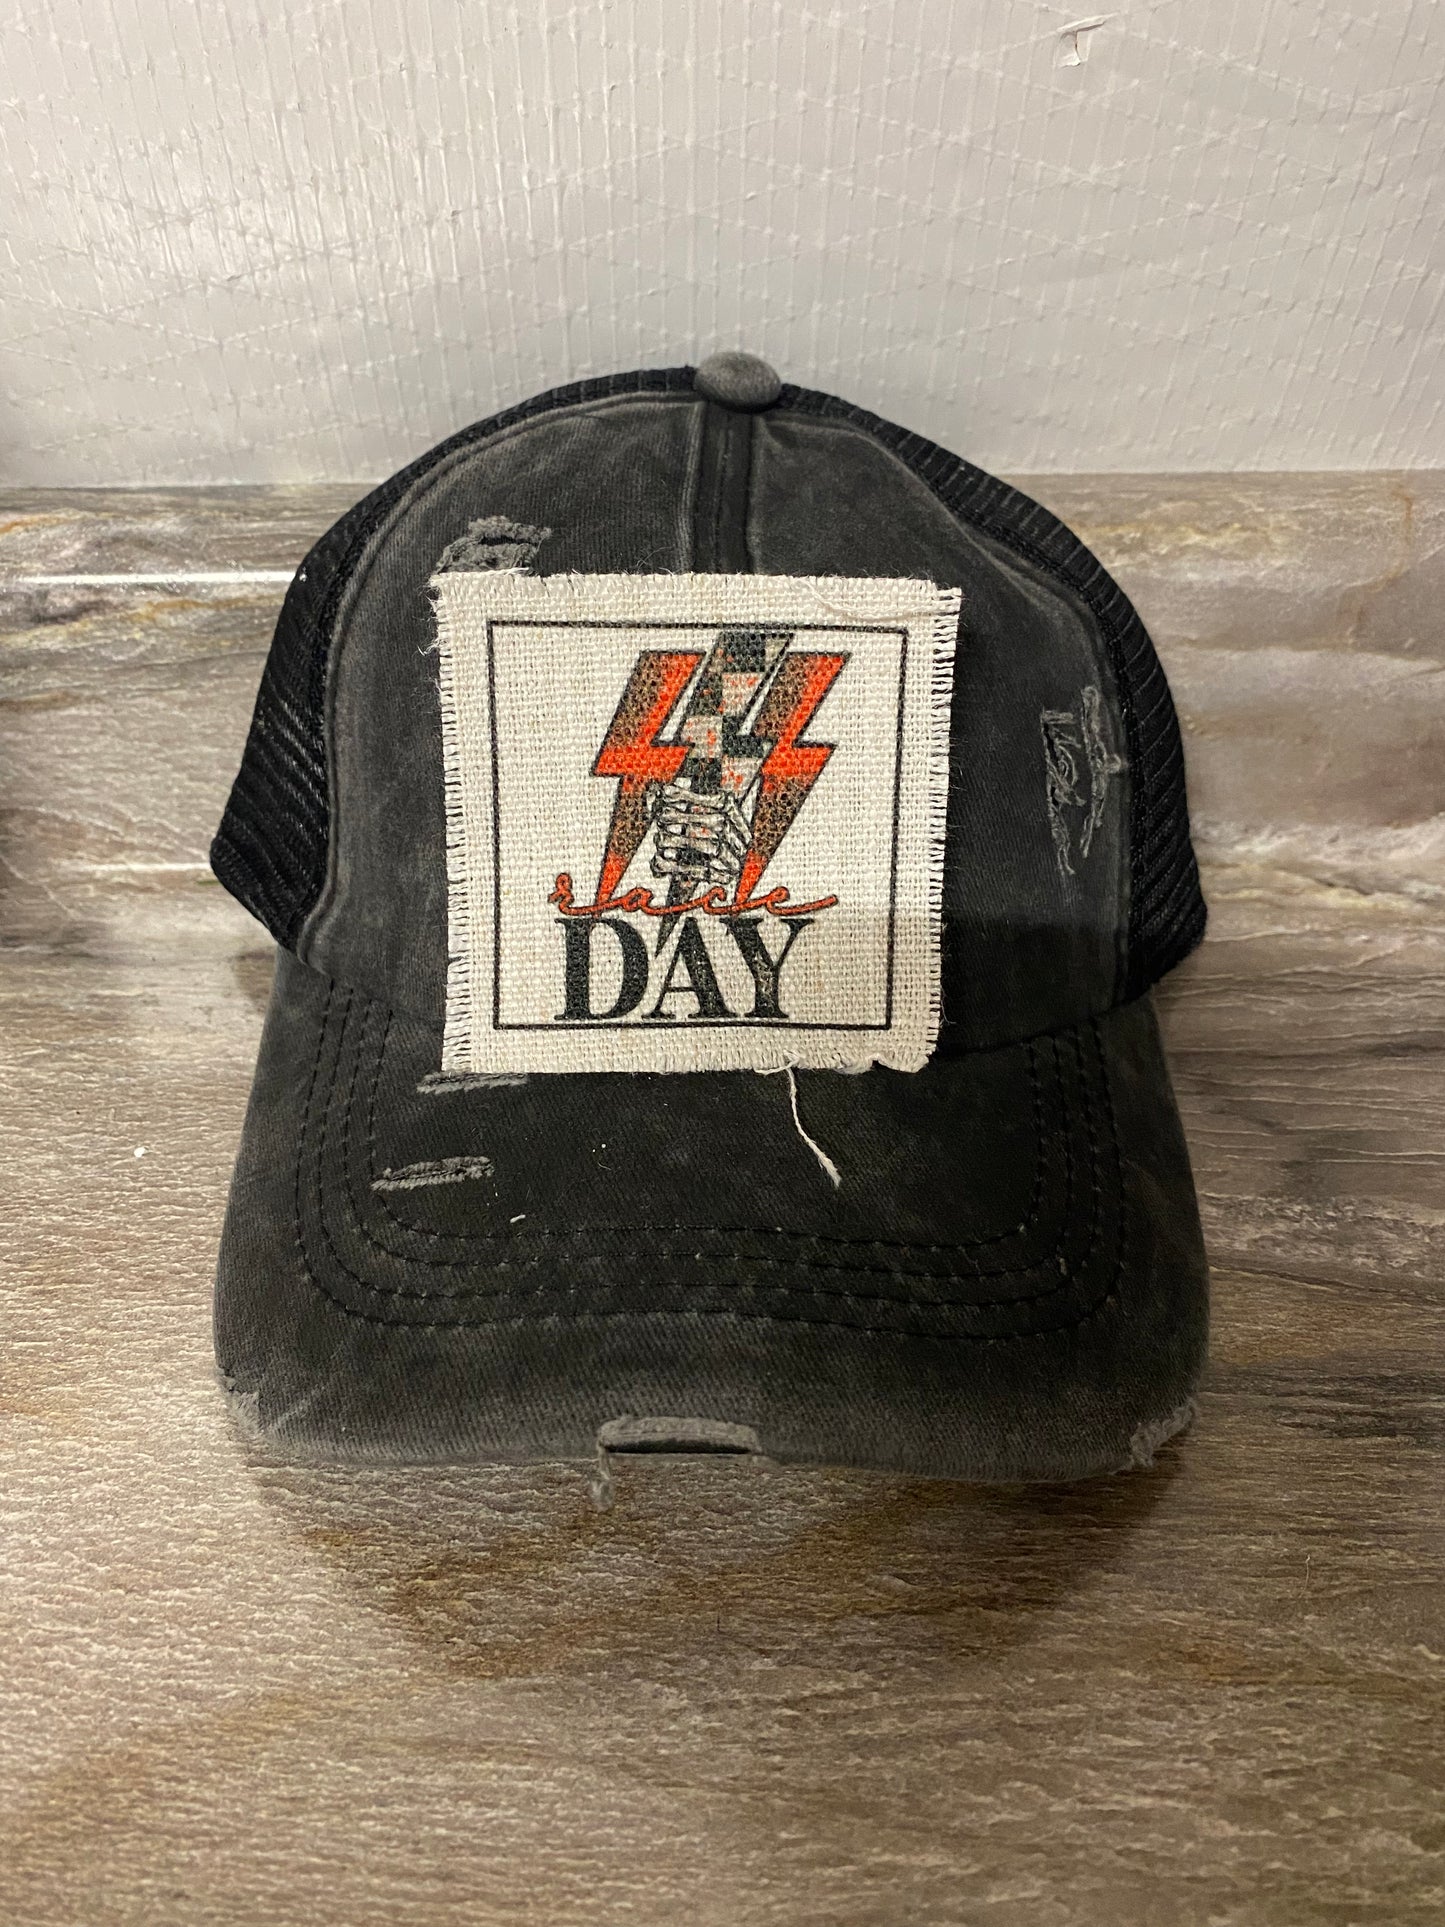 Race Day with Bolts Hat Patch